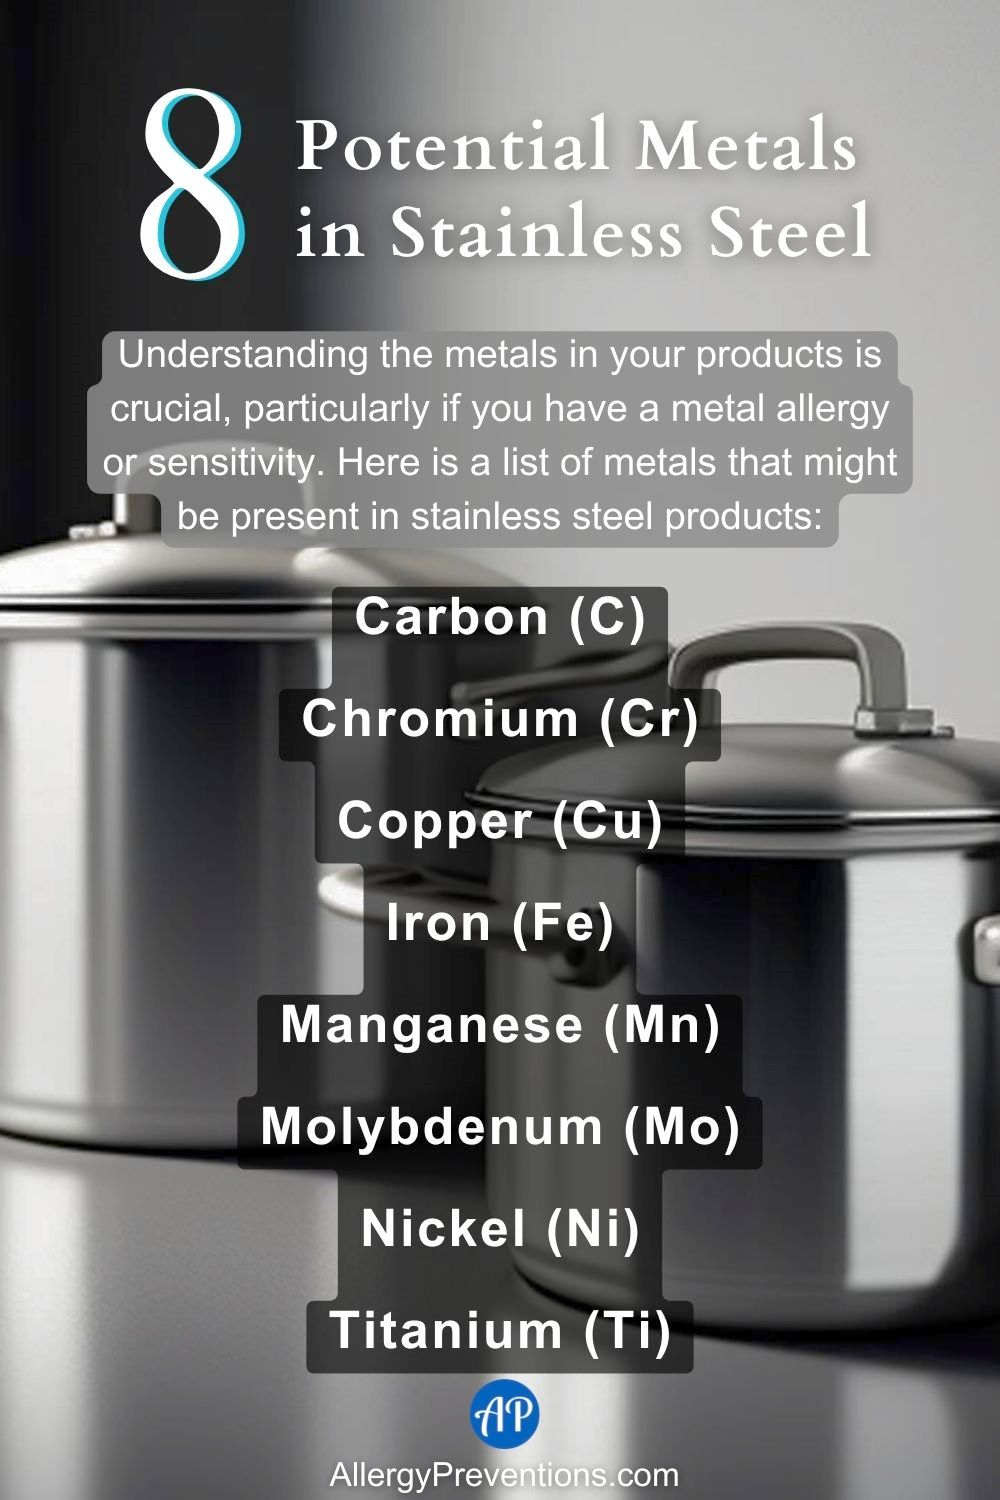 potential metals in stainless steel infographic. Understanding the metals in your products is crucial, particularly if you have a metal allergy or sensitivity. Here is a list of metals that might be present in stainless steel products:, Carbon (C), Chromium (Cr), Copper (Cu), Iron (Fe), Manganese (Mn), Molybdenum (Mo), Nickel (Ni), and Titanium (Ti).